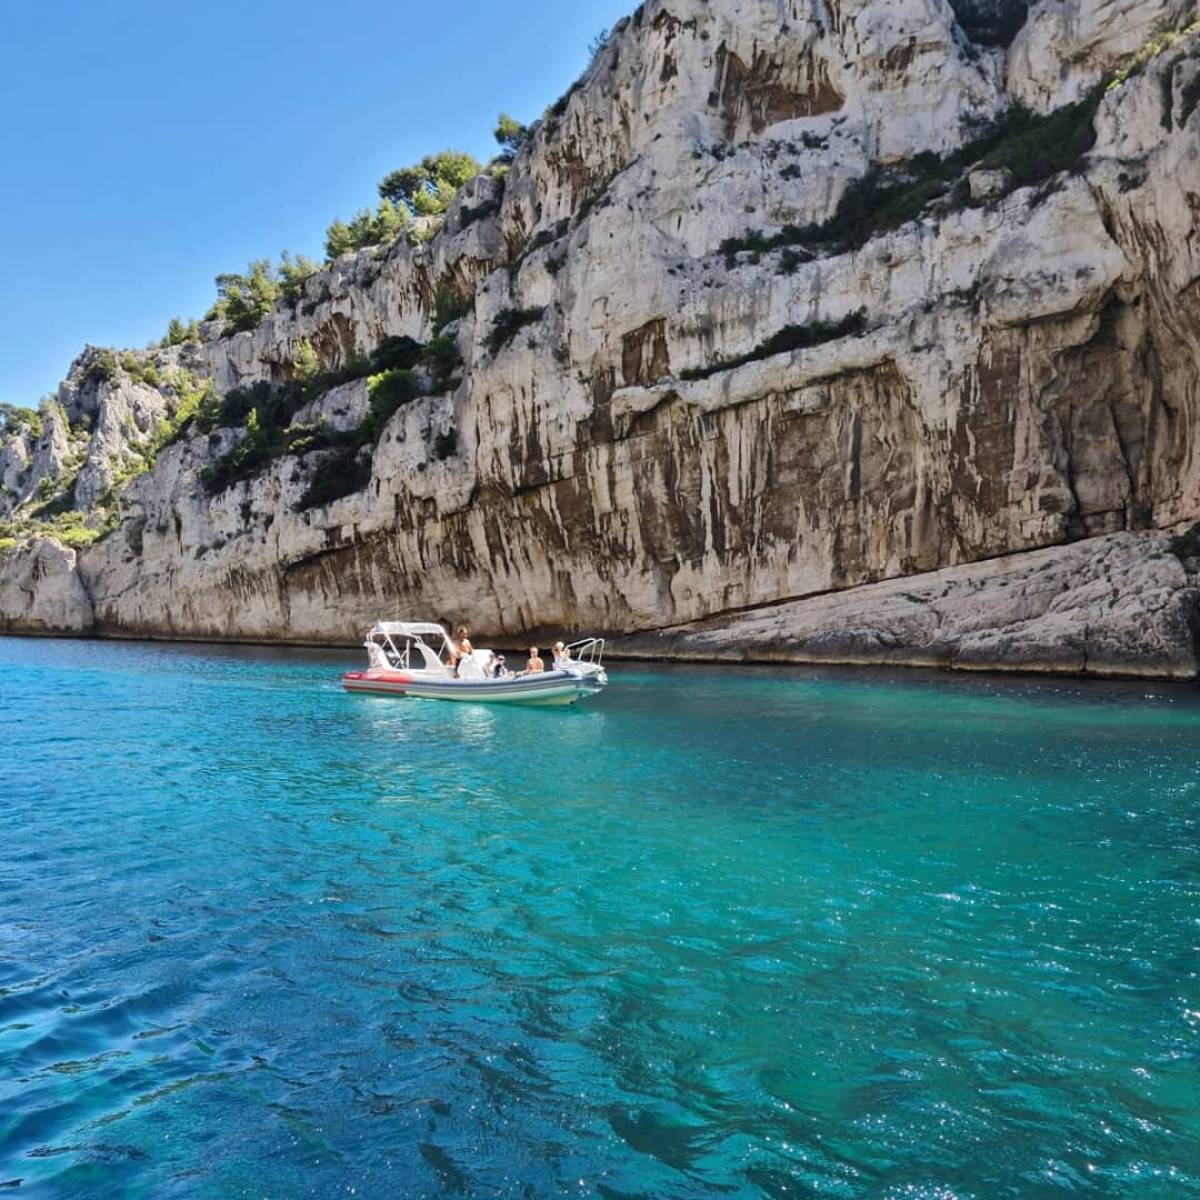 Private or shared visit with l'Eden Boat in La Ciotat, Cassis and Marseille to visit the Calanques!